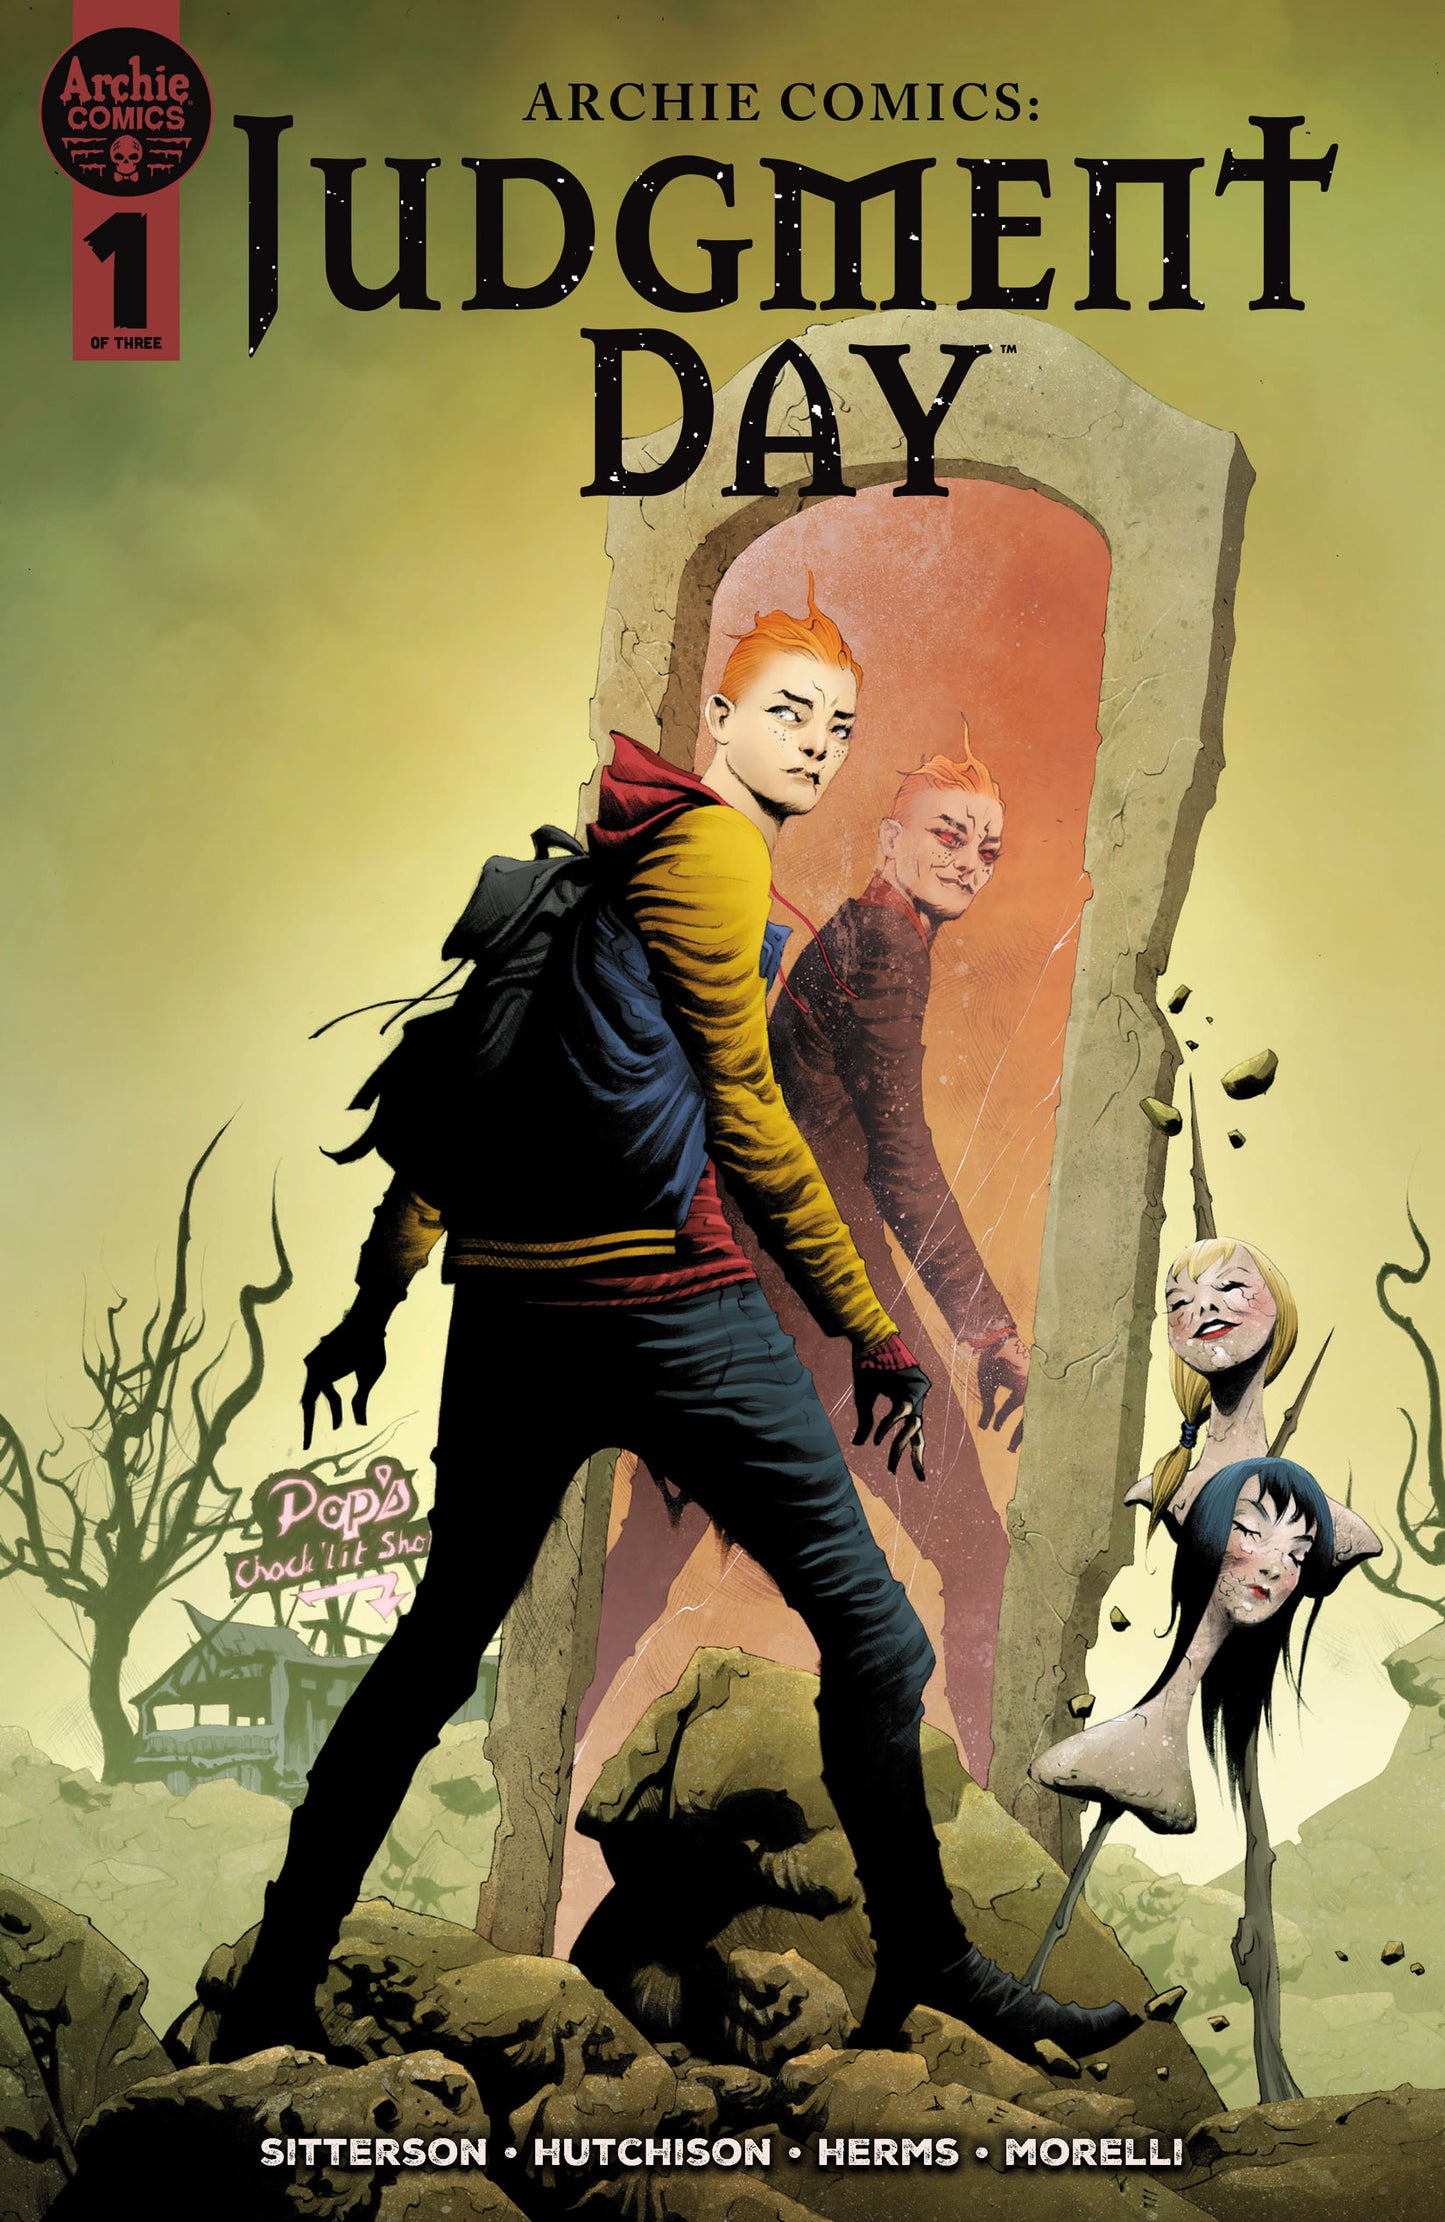 ARCHIE COMICS: JUDGMENT DAY #1 (of 3)